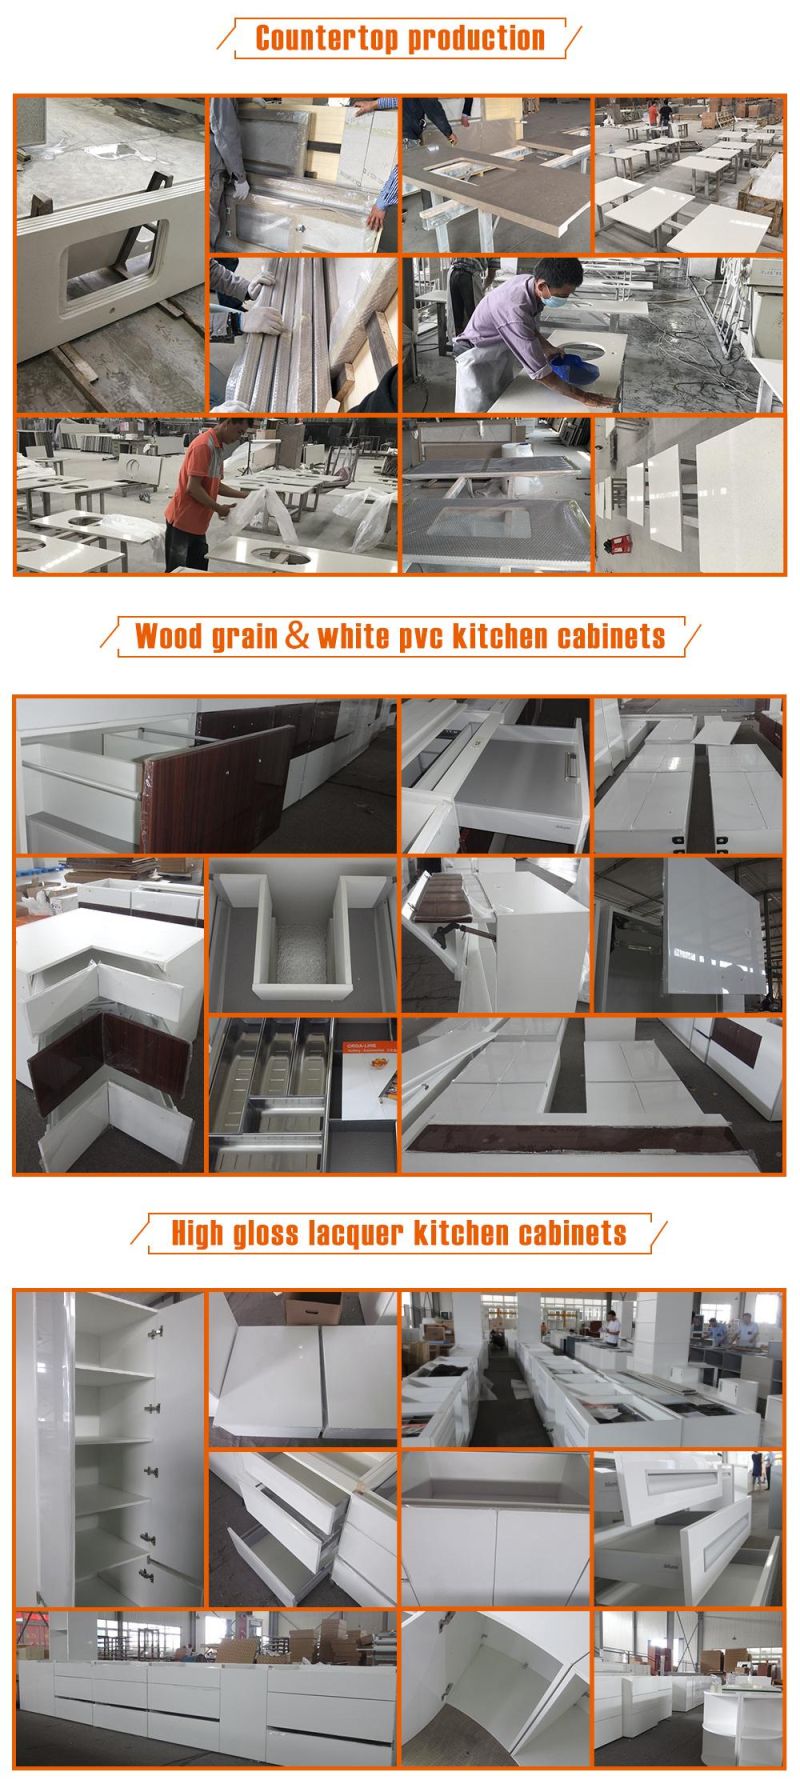 Swing Door Style Modern Solid Wood Kitchen Cabinets From Factory